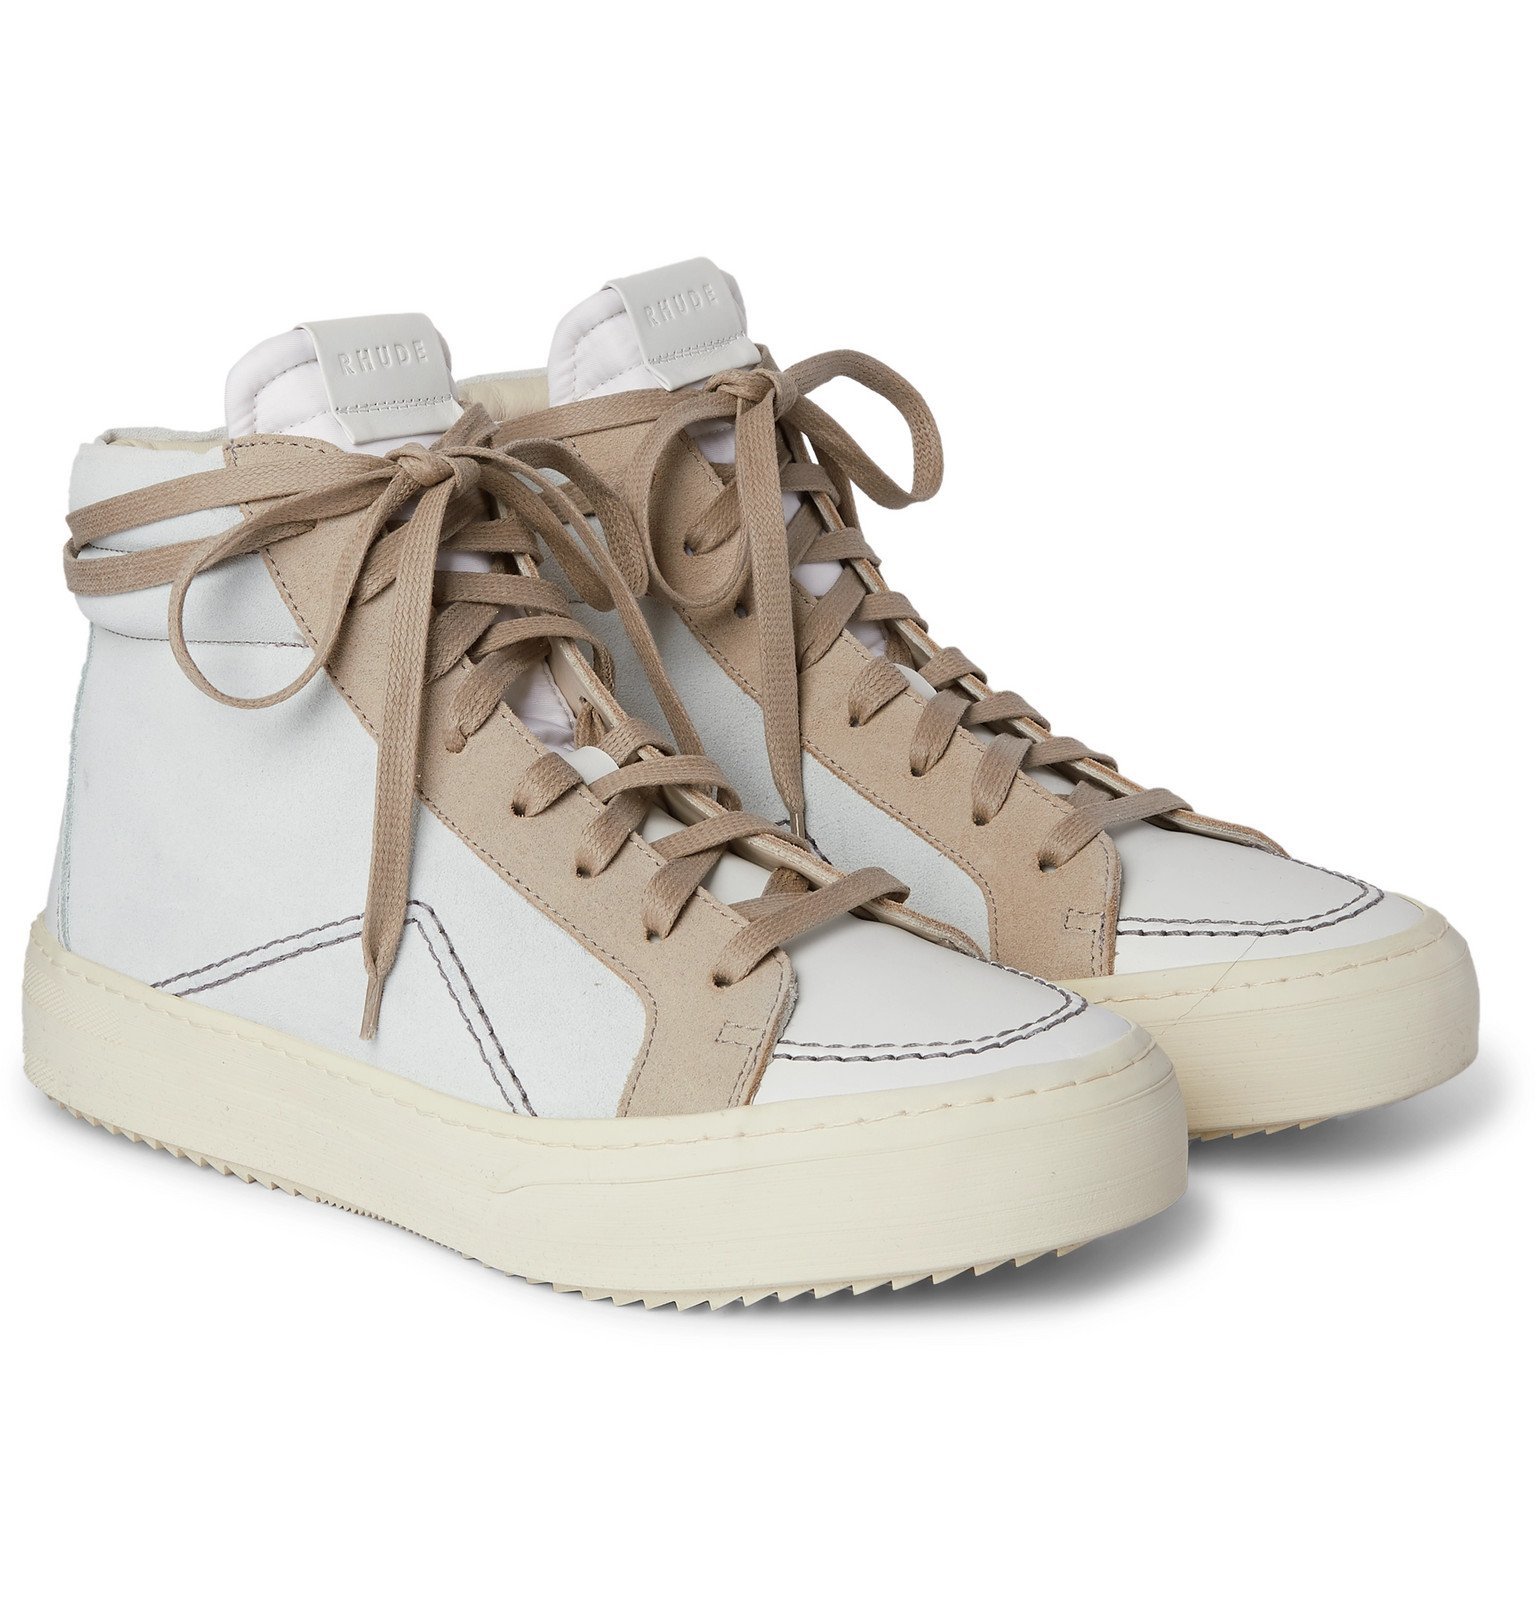 Rhude - V1 Suede and Leather High-Top Sneakers - White Rhude